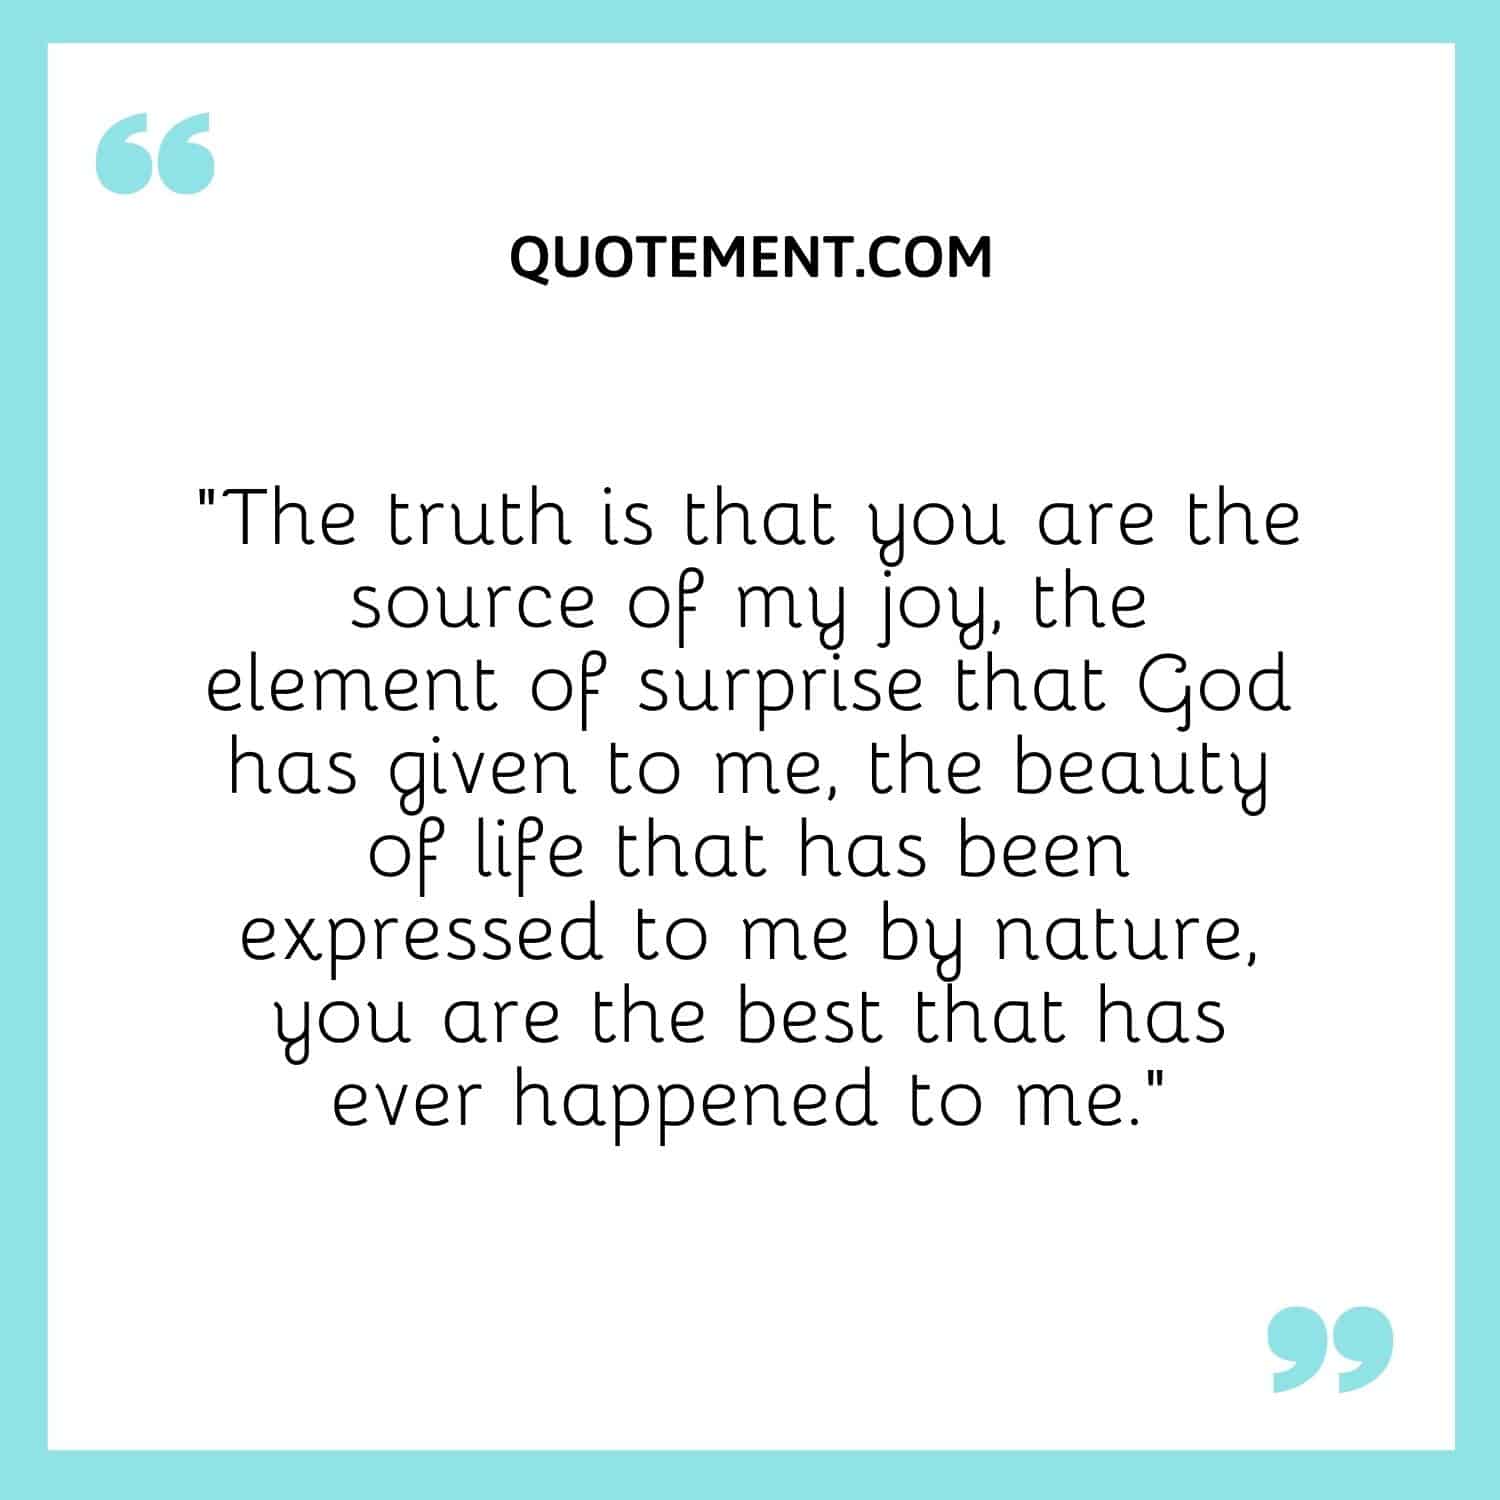 “The truth is that you are the source of my joy, the element of surprise that God has given to me, the beauty of life that has been expressed to me by nature, you are the best that has ever happened to me.”